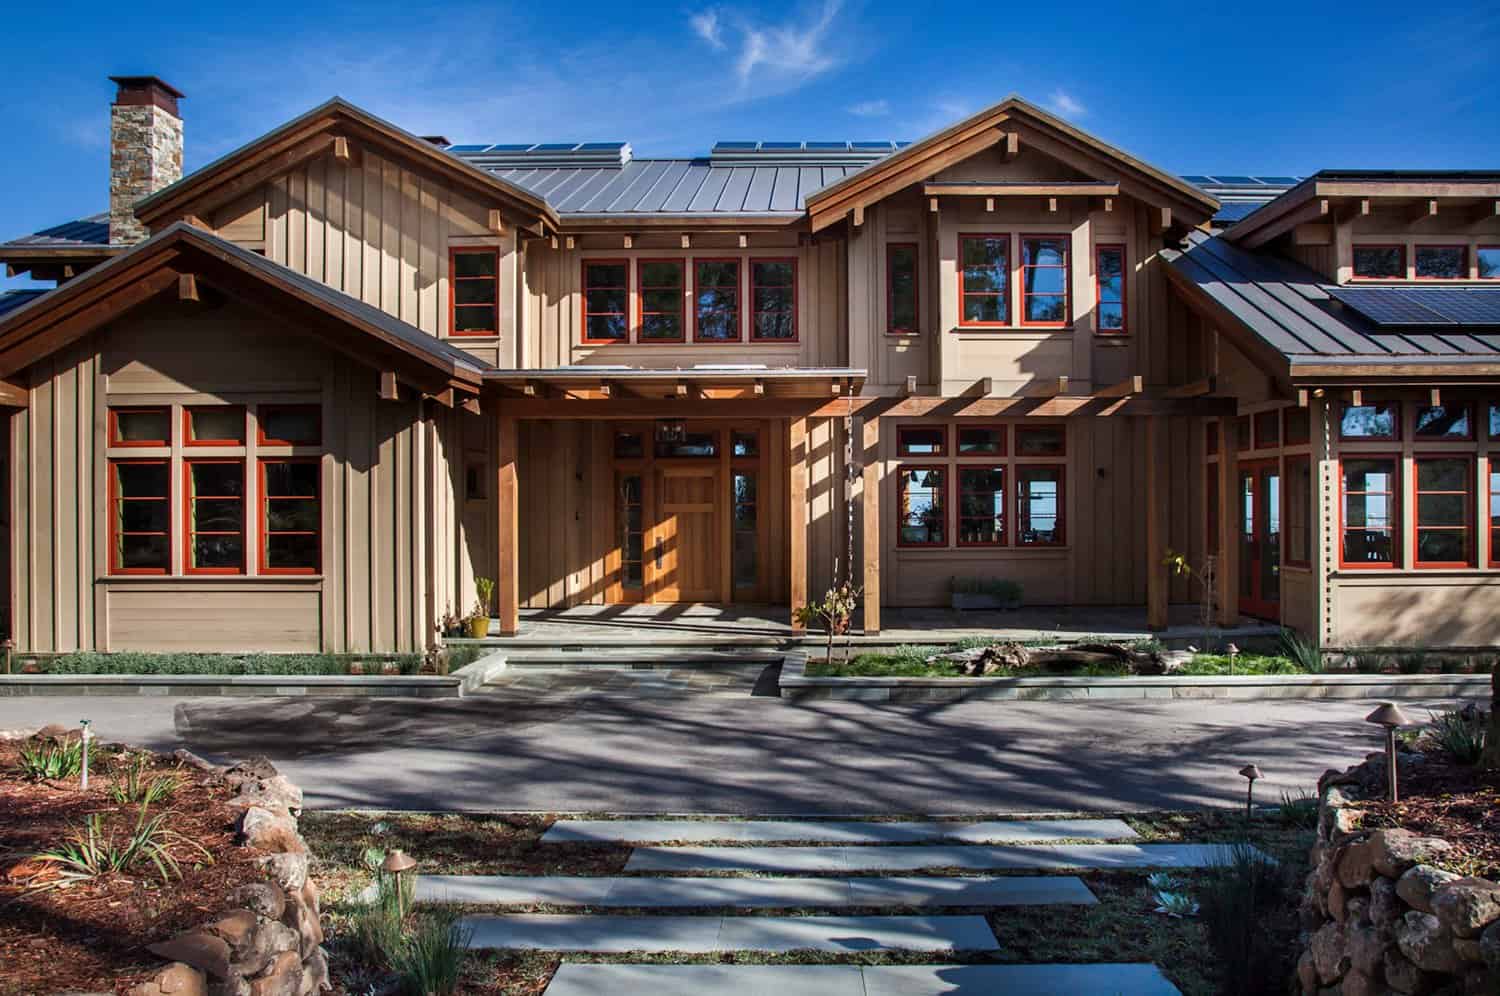 A Japanese inspired craftsman house in the San Francisco Bay Area